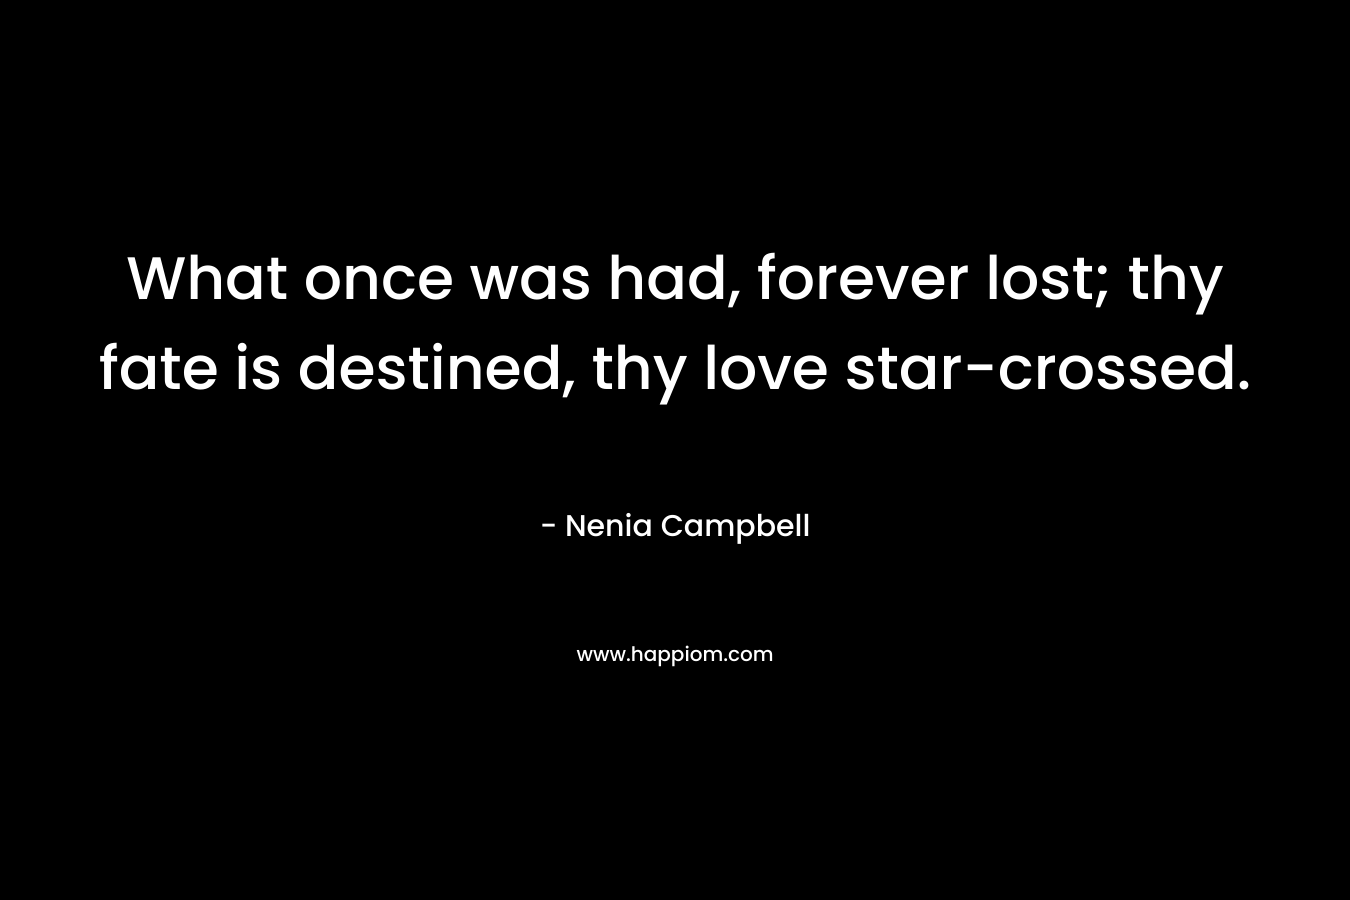 What once was had, forever lost; thy fate is destined, thy love star-crossed.